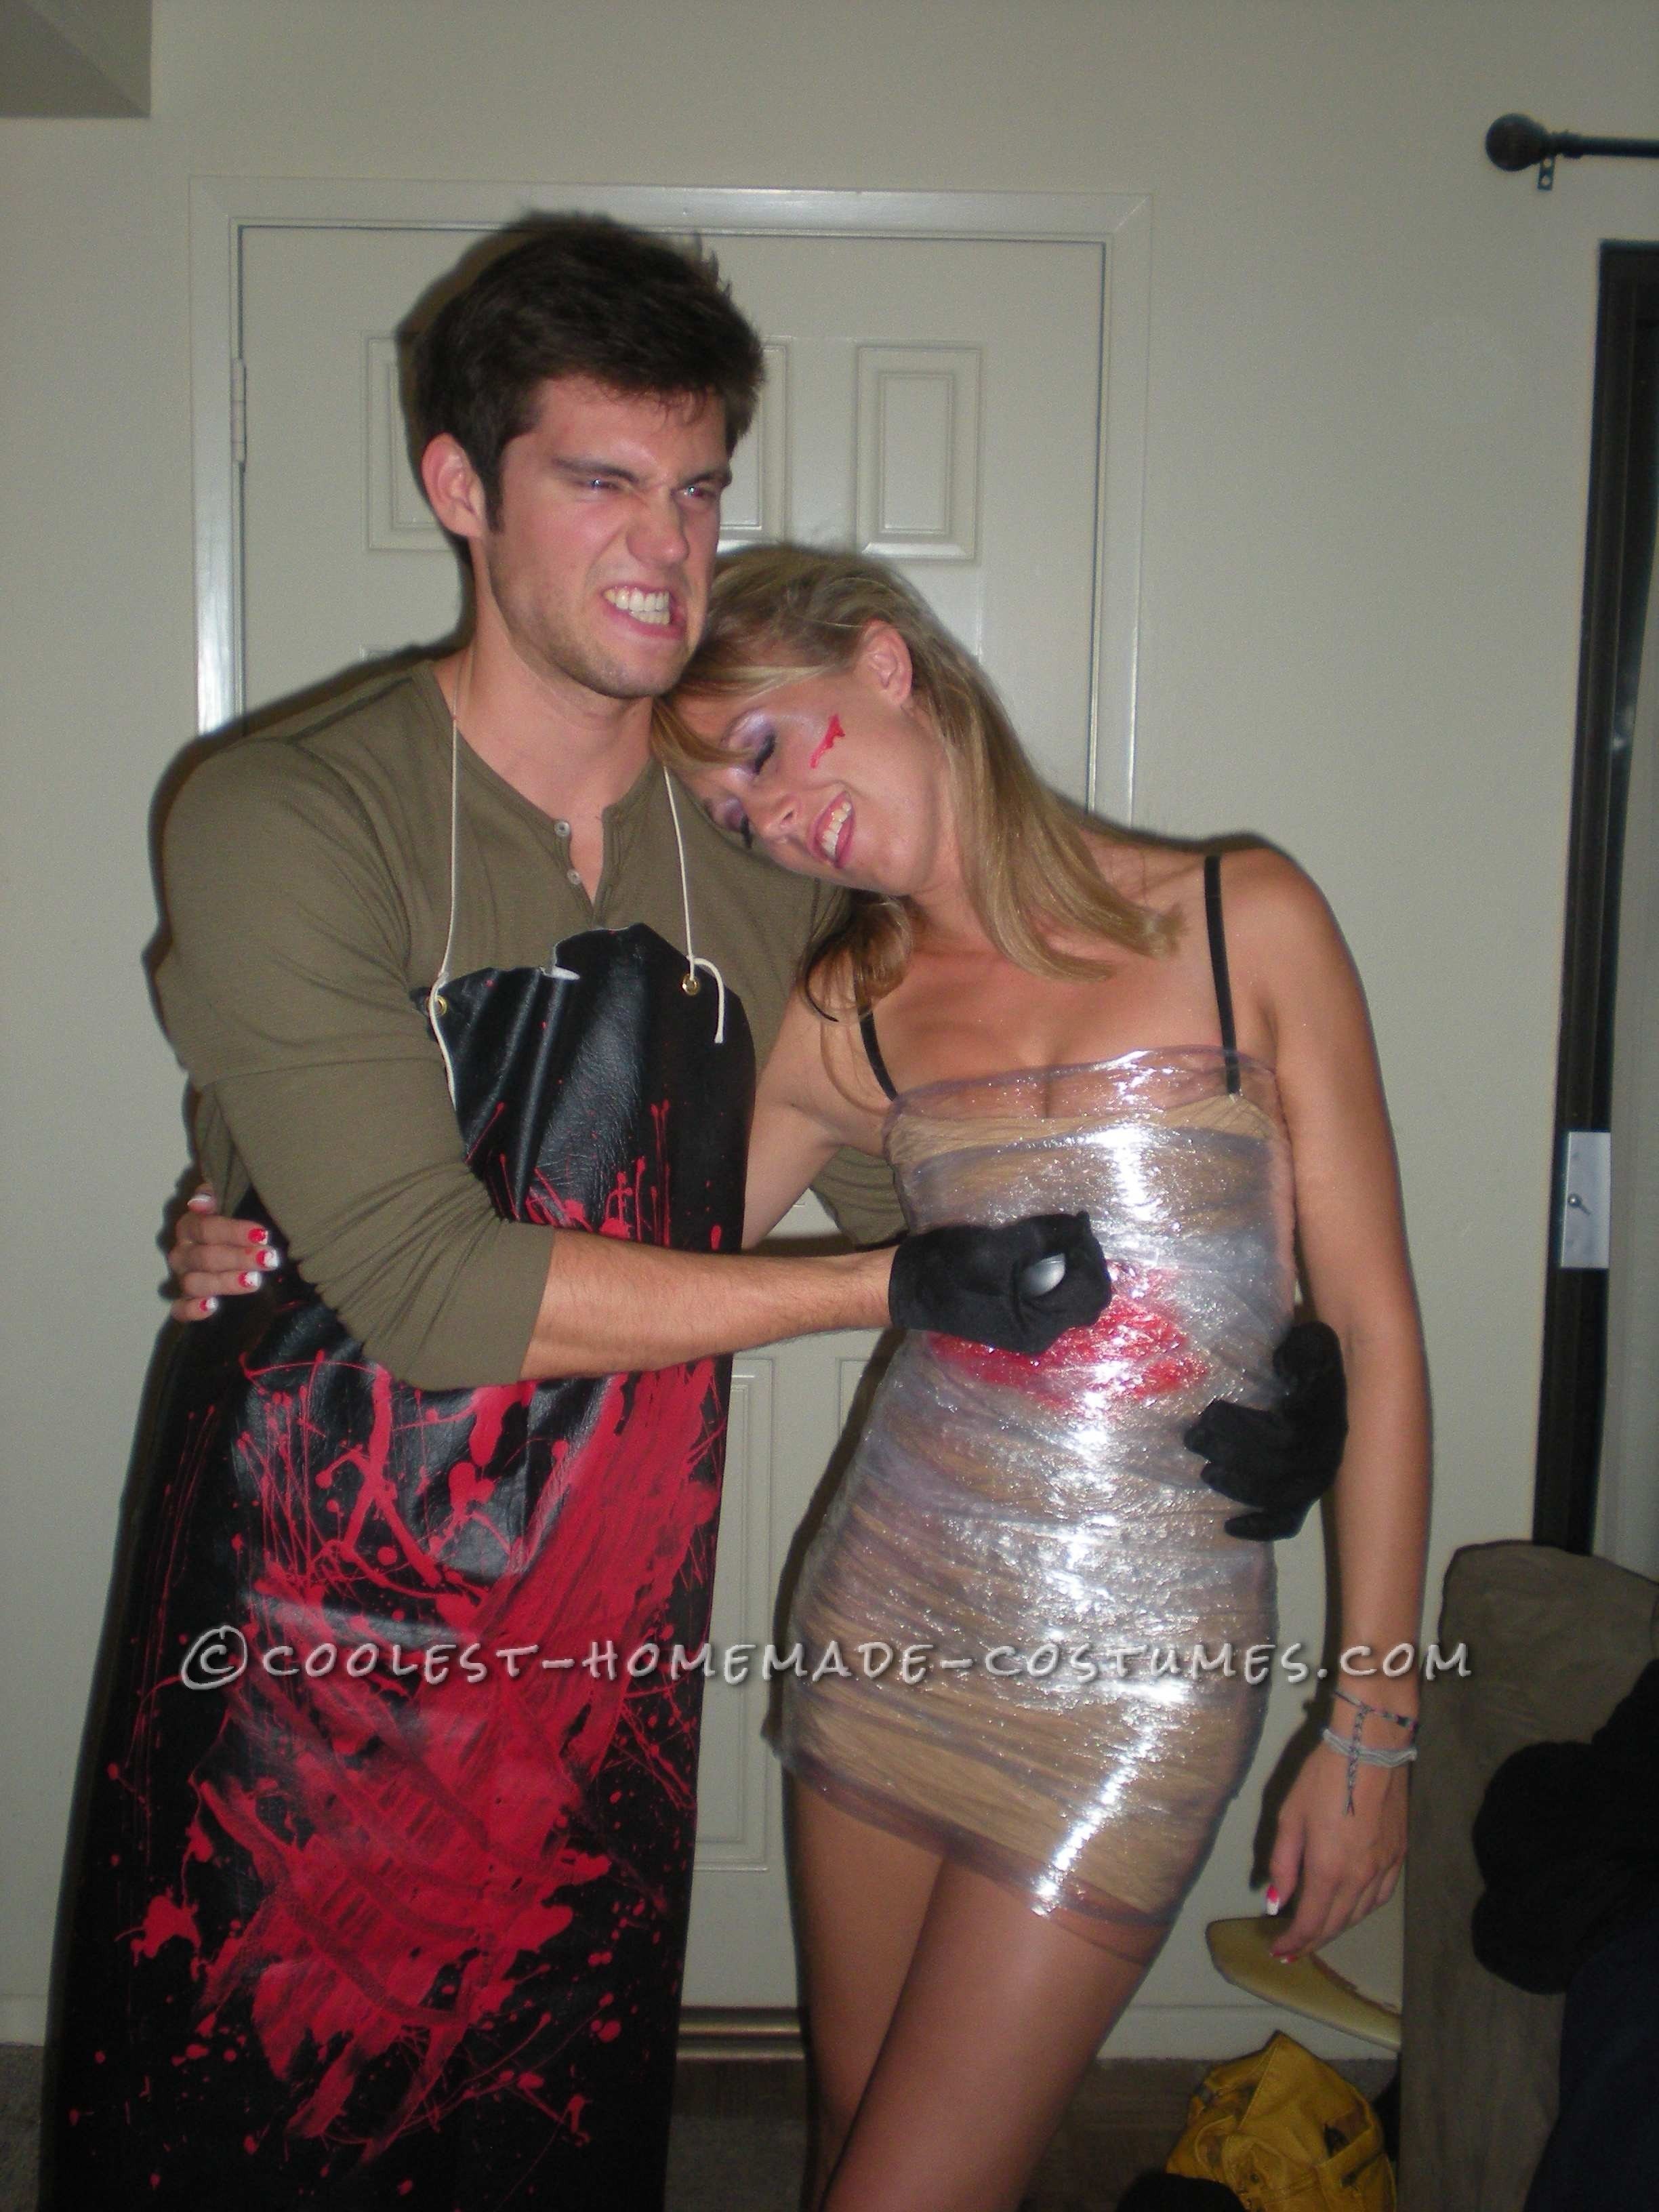 10 Most Recommended Couples Homemade Halloween Costume Ideas cheap and easy to make dexter couple costume 1 2022